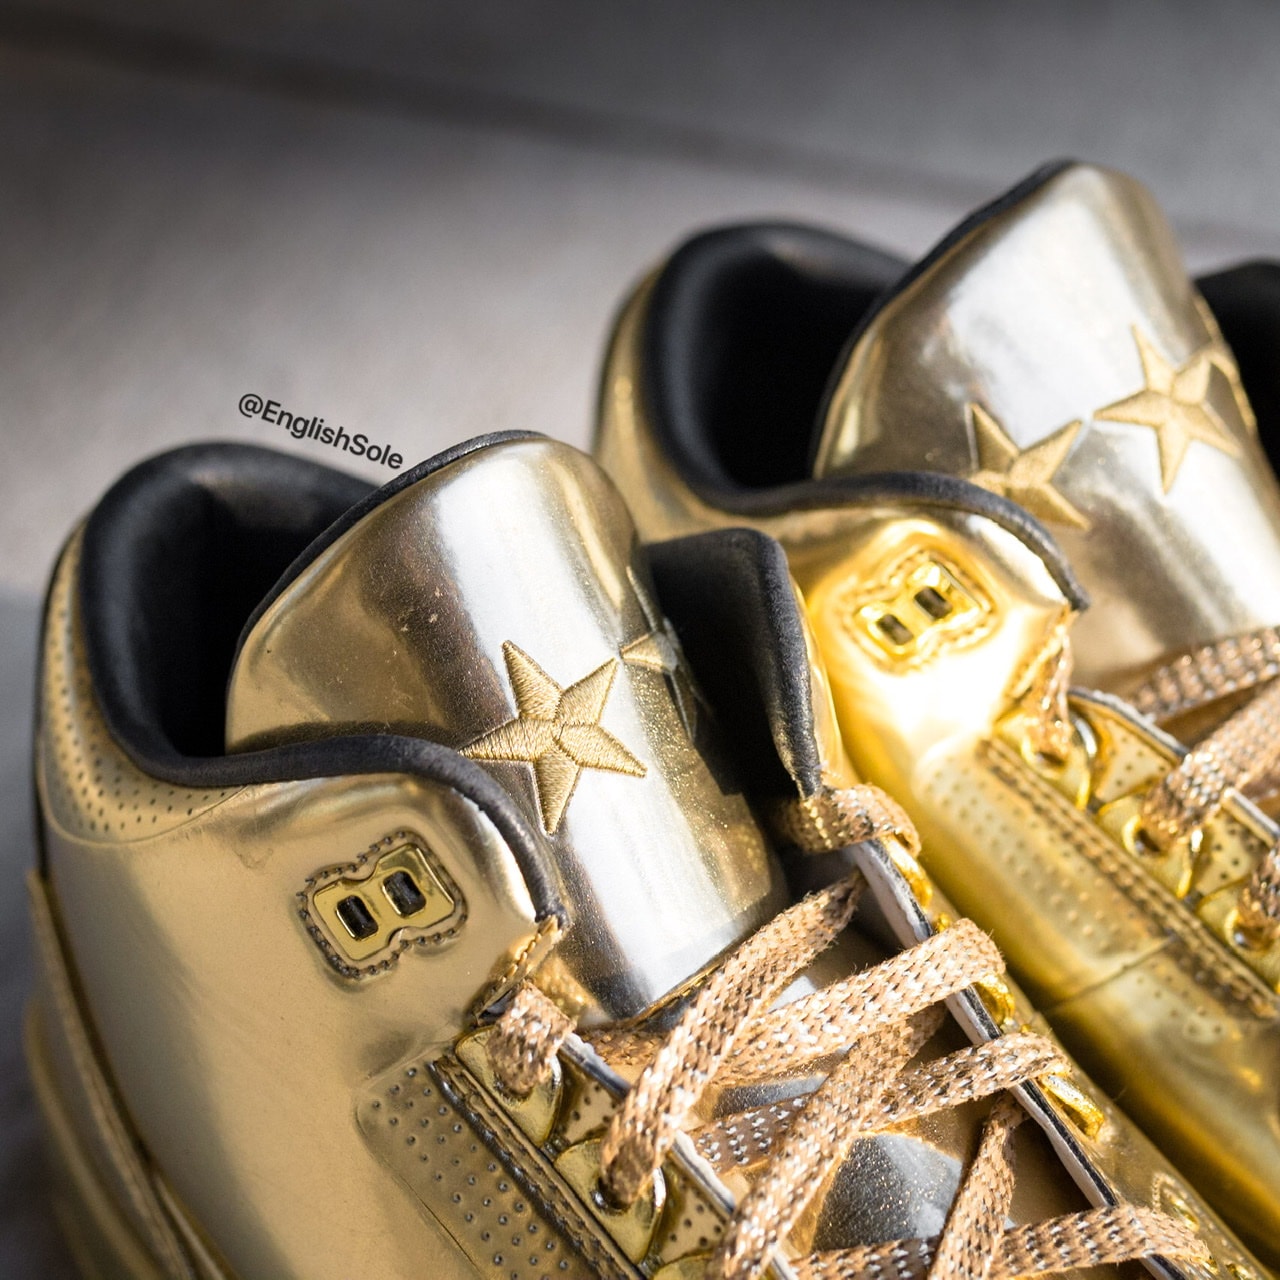 usher raymond air jordan brand 3 metallic gold pe sample 1 of 10 official release date info photos price store list buying guide 2014